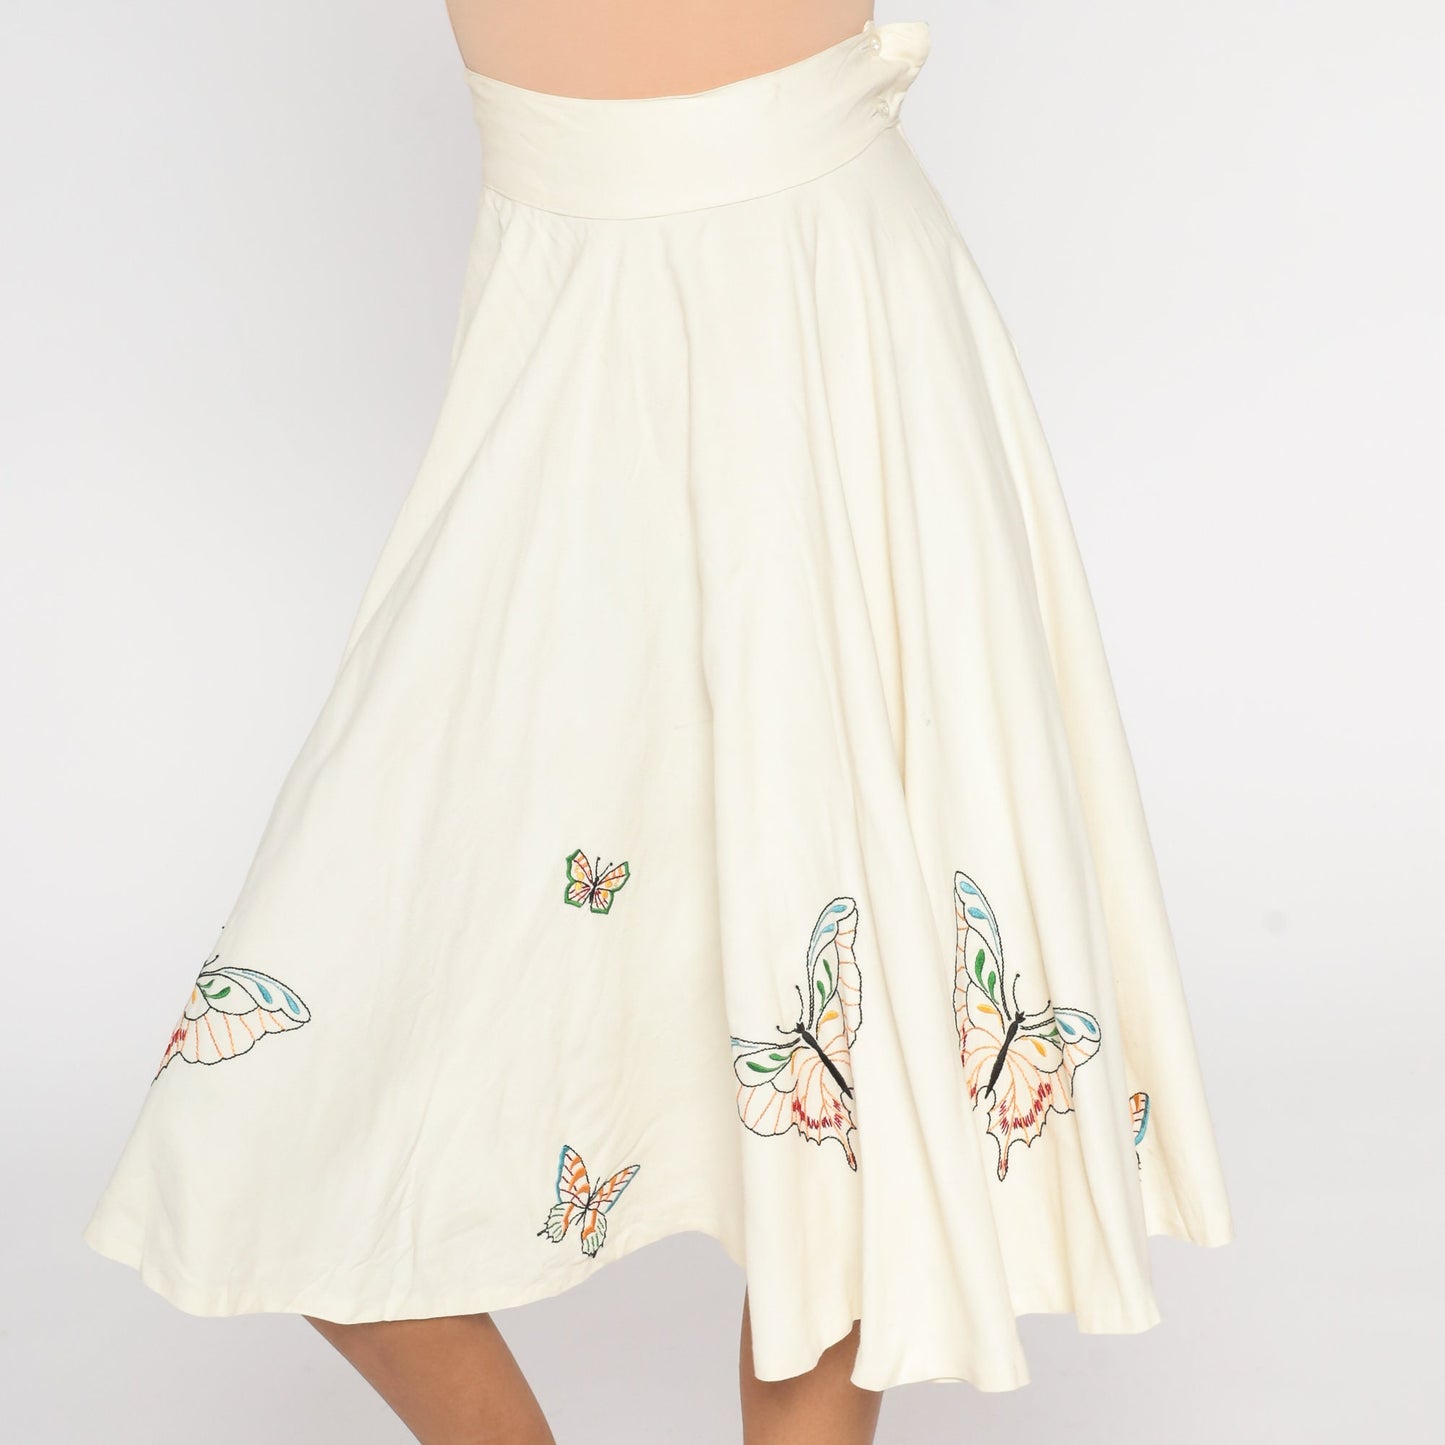 1960s Butterfly Skirt White Embroidered Skirt 60s Hippie Boho High Waisted Circle Skirt Pin Up Midi Vintage Bohemian High Waist Small